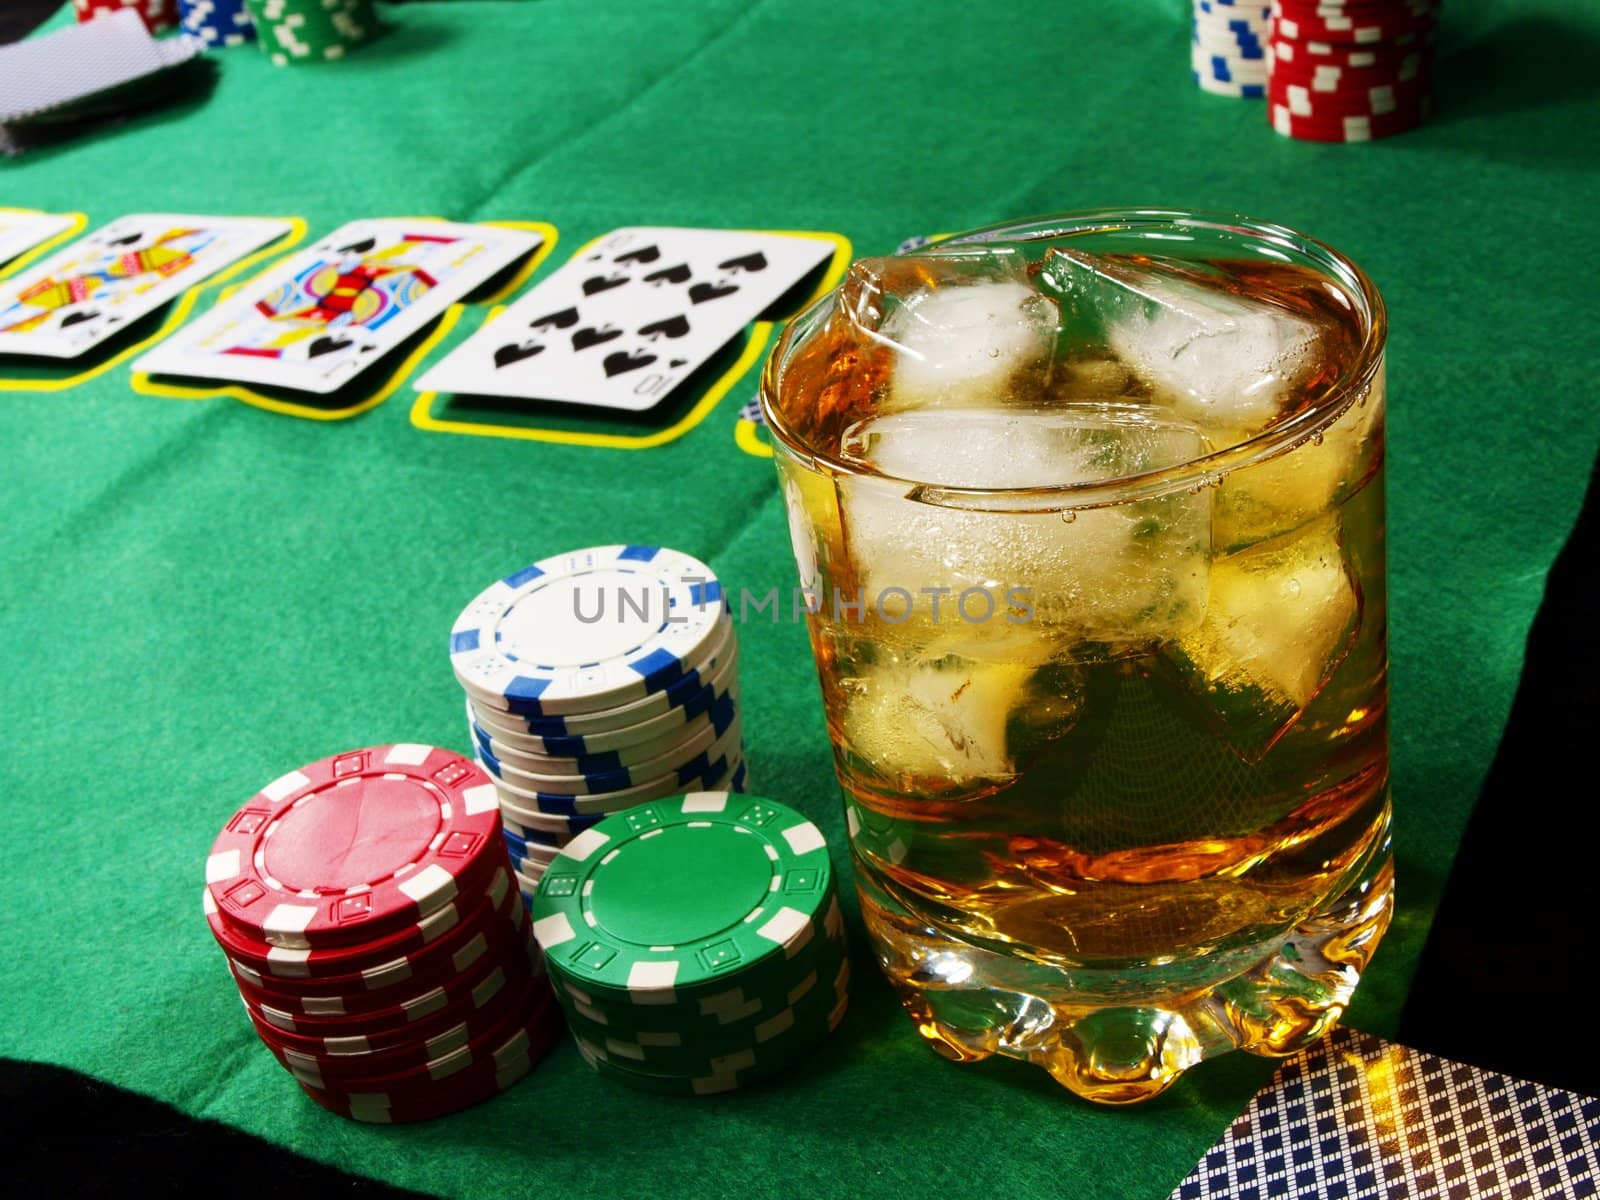 Poker and black jack, with isolated gaming objects, towards green 